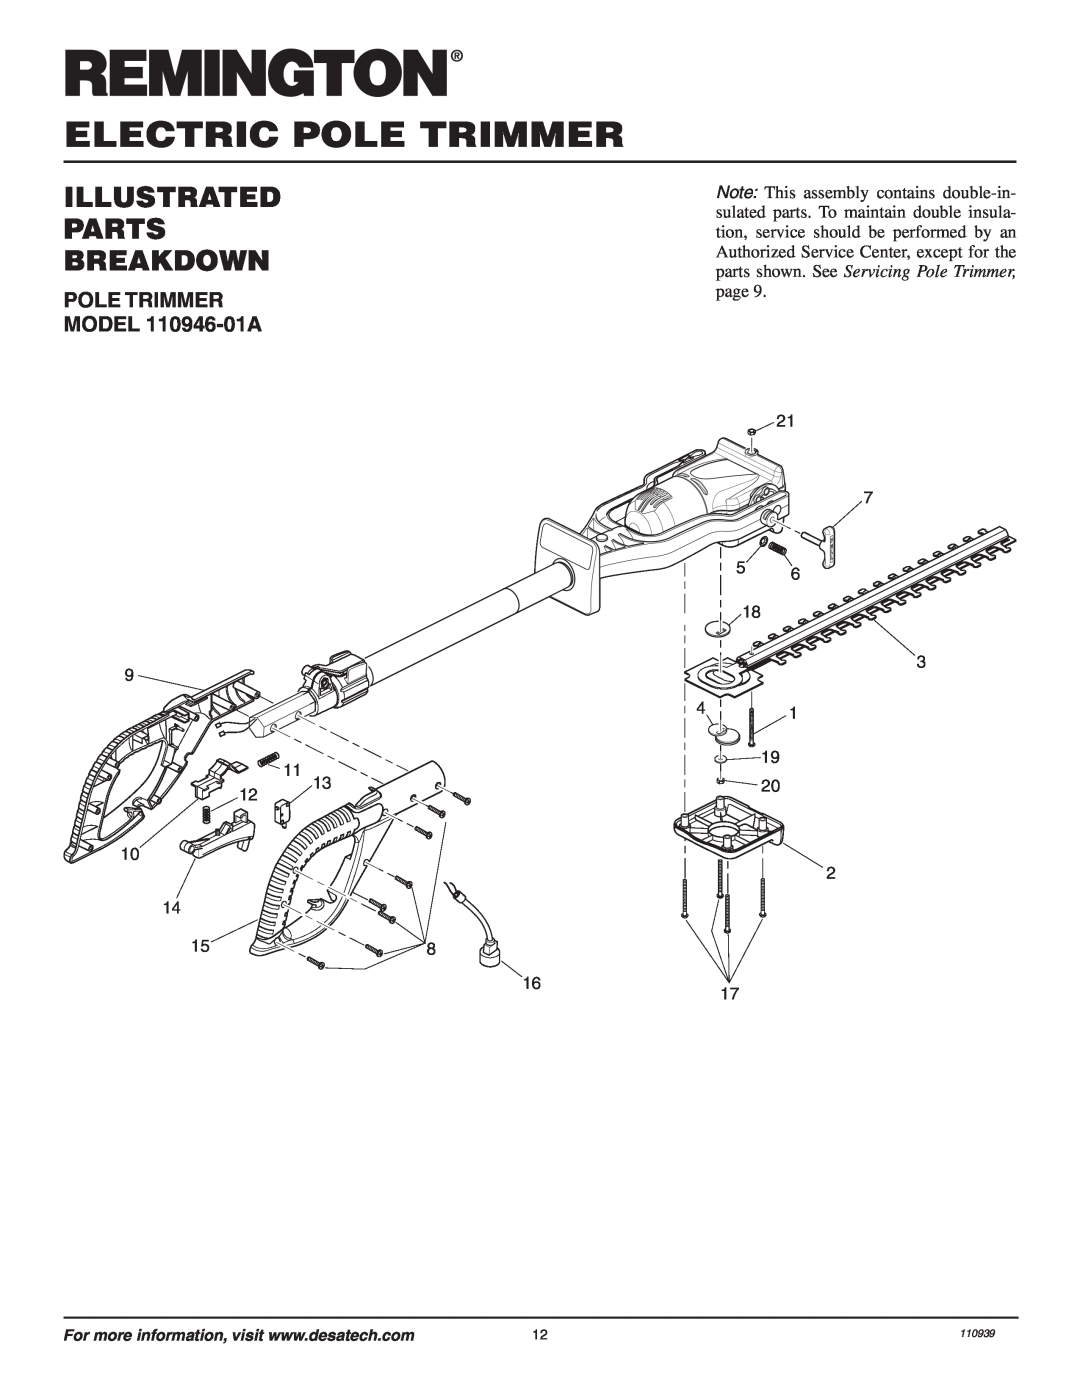 Remington owner manual Illustrated Parts Breakdown, POLE TRIMMER MODEL 110946-01A, Electric Pole Trimmer, 110939 